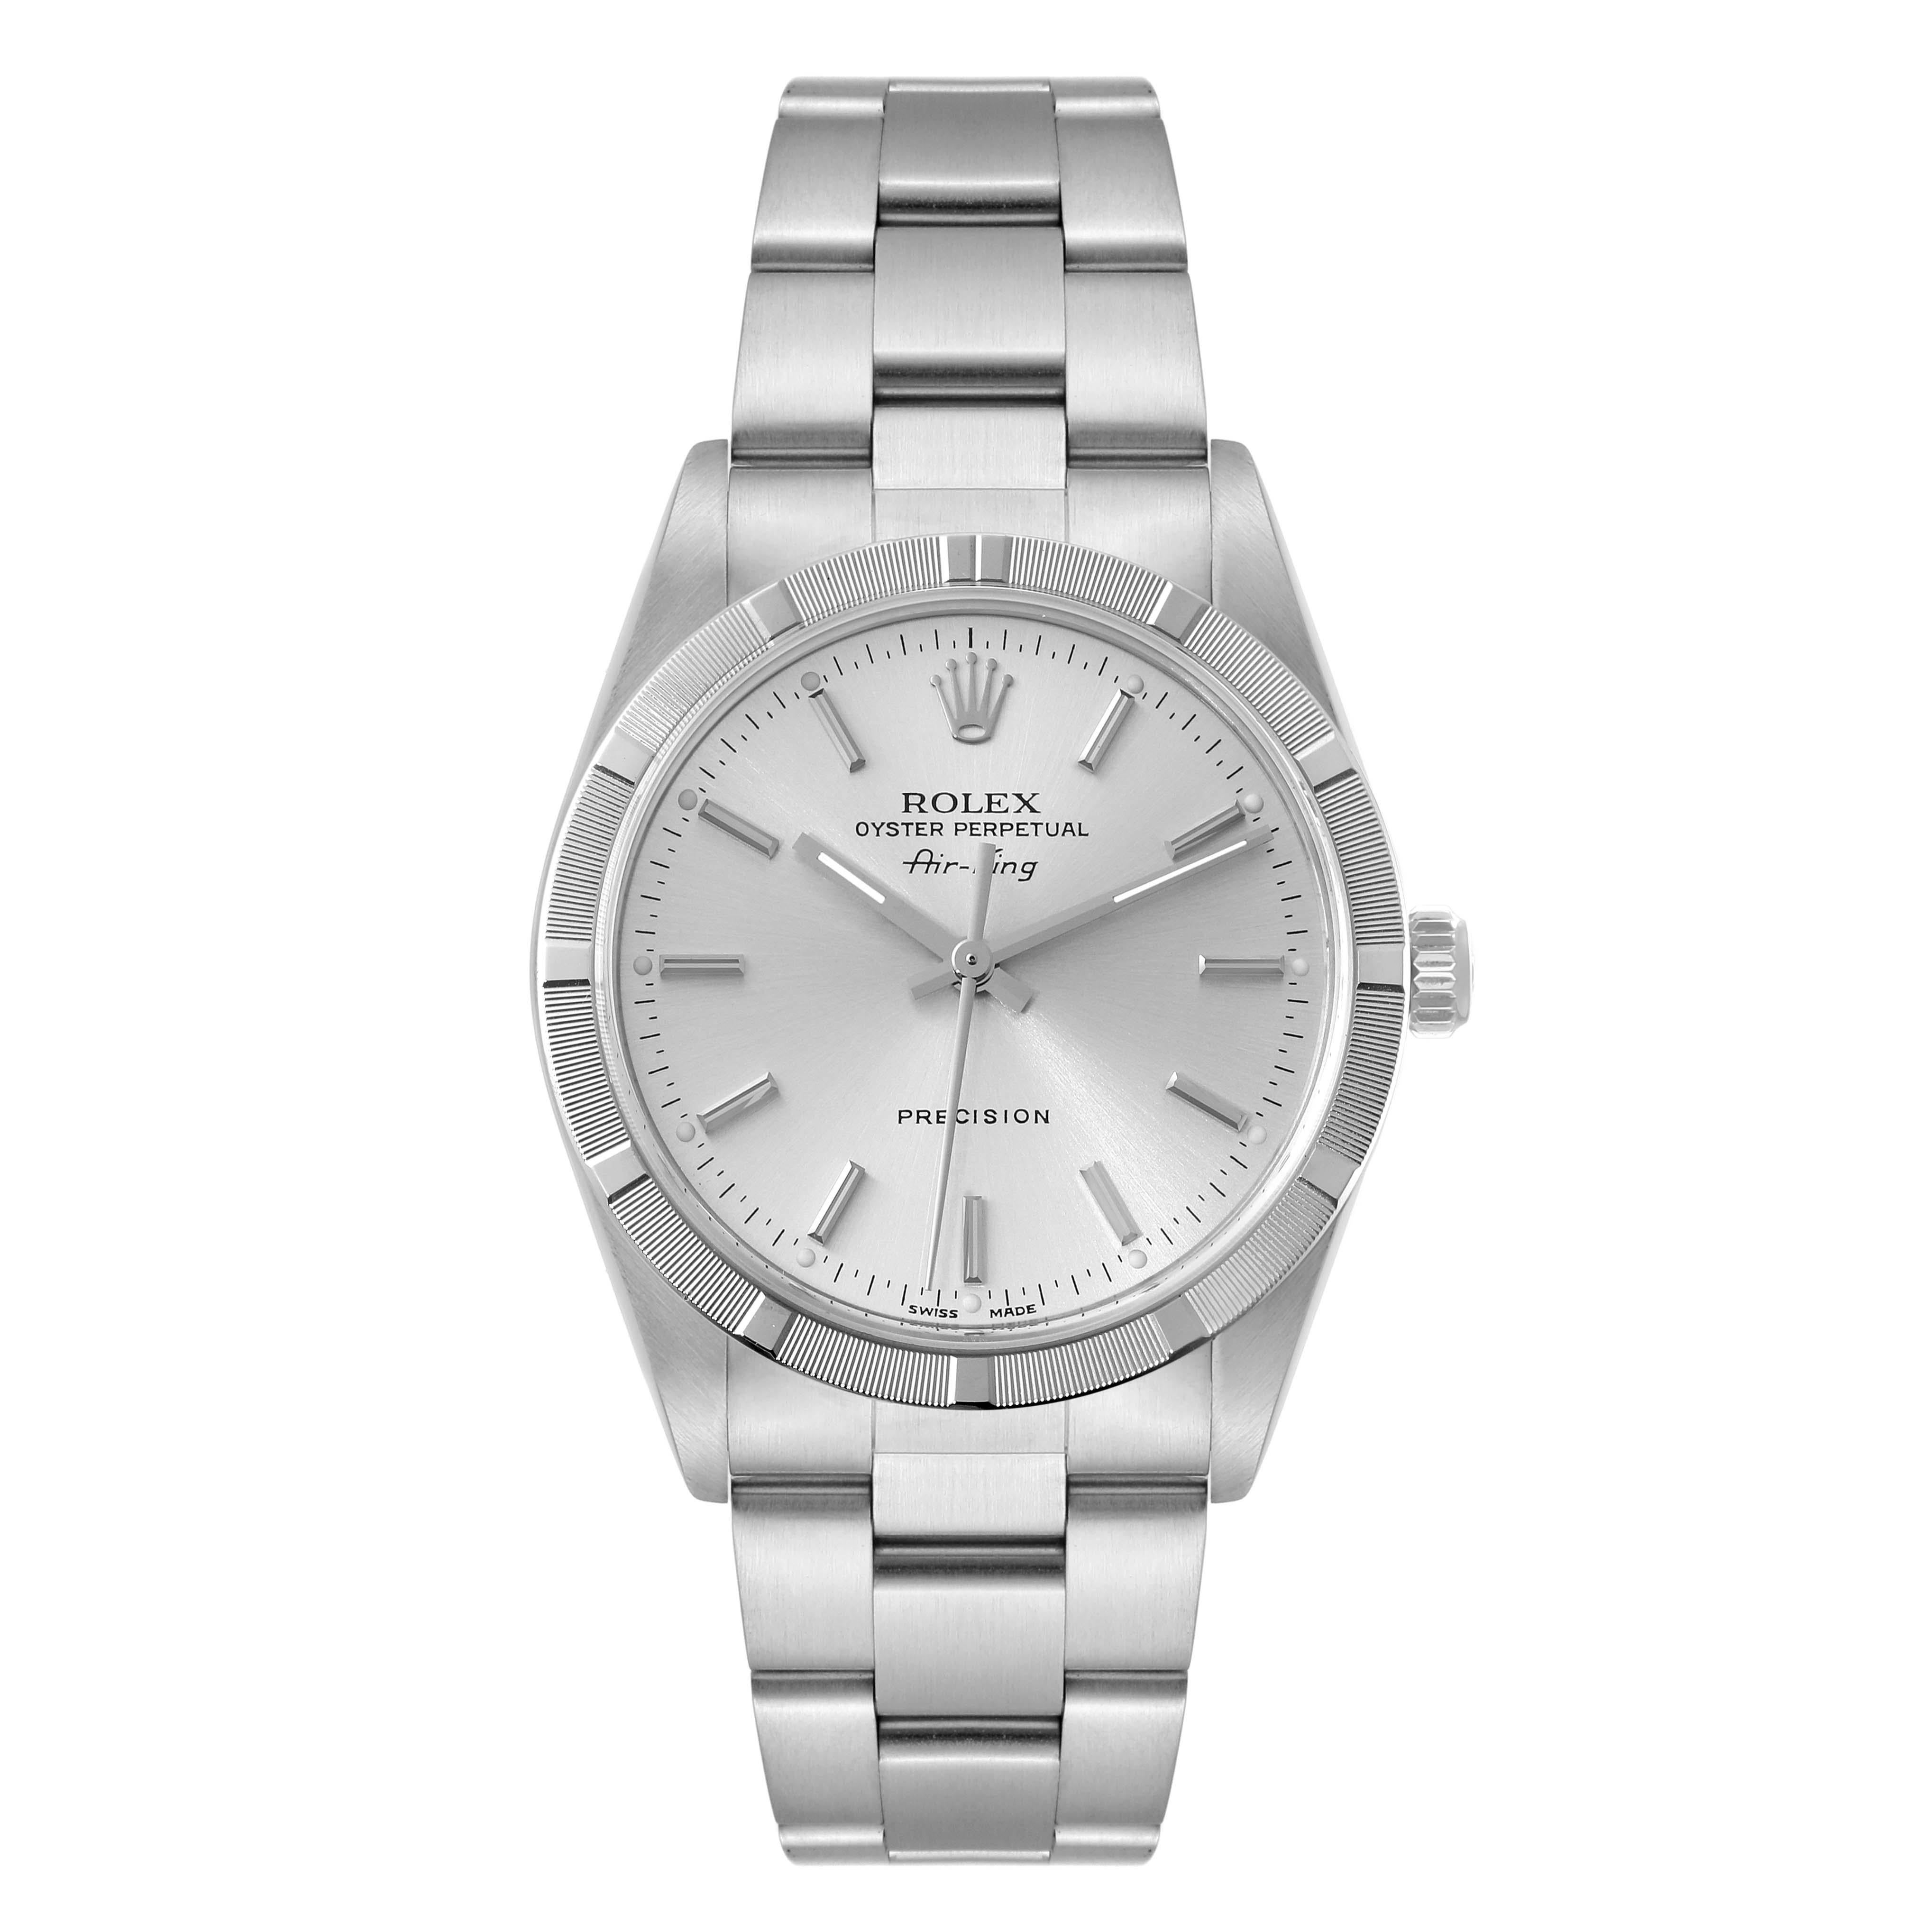 Rolex Air King Engine Turned Bezel Silver Dial Steel Mens Watch 14010. Automatic self-winding movement. Stainless steel case 34.0 mm in diameter. Rolex logo on the crown. Stainless steel engine turned bezel. Scratch resistant sapphire crystal.